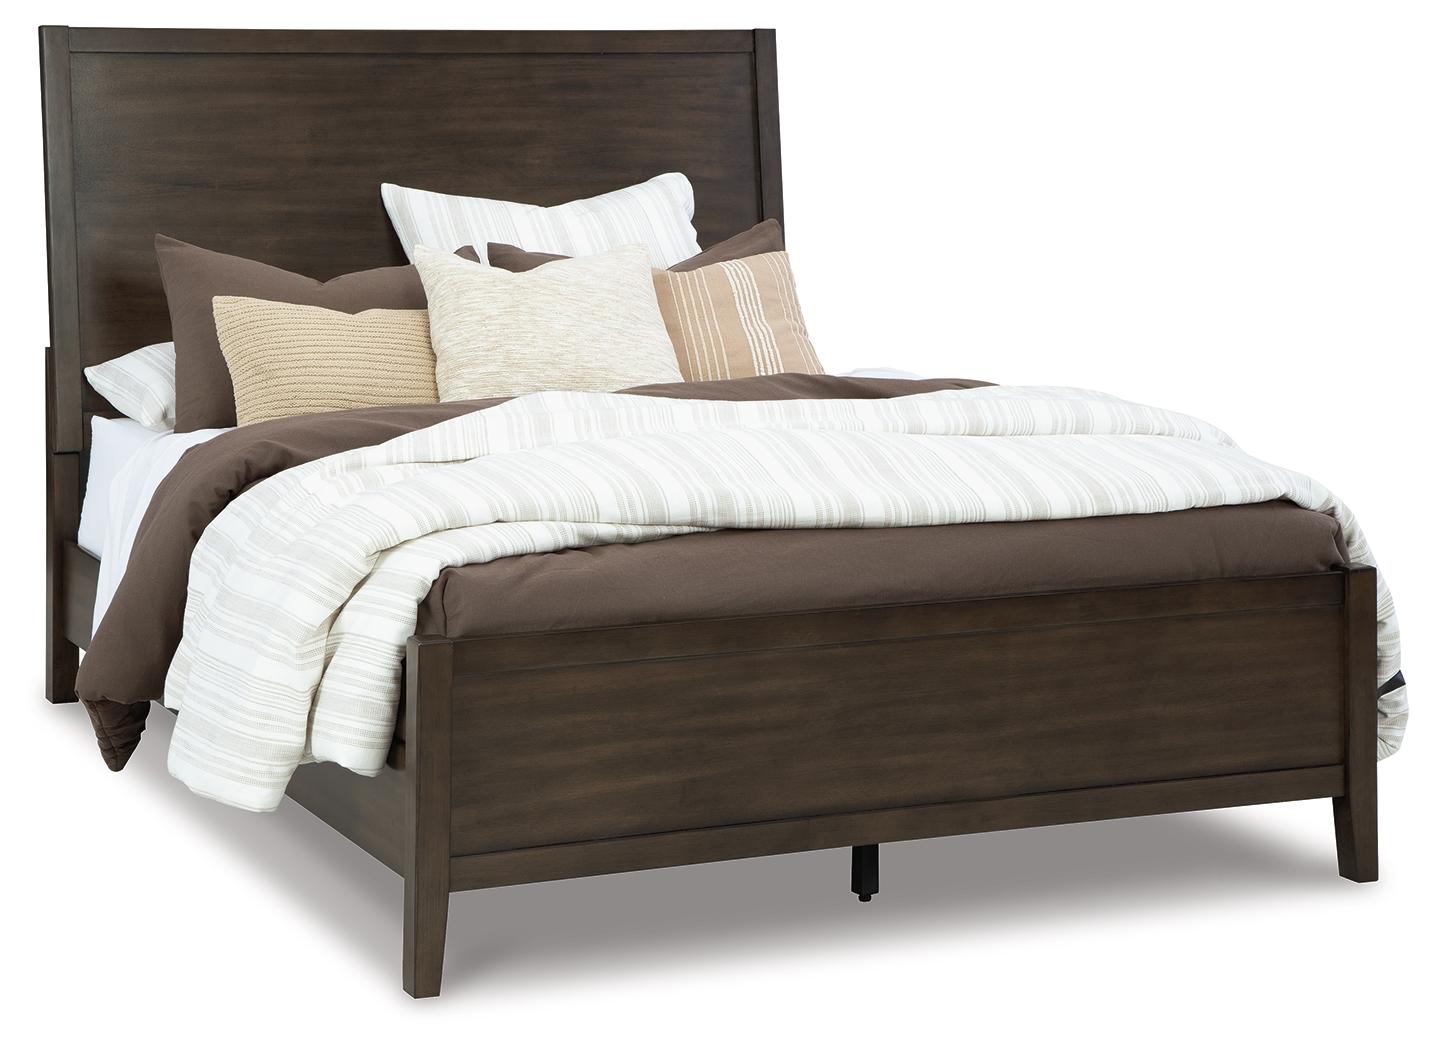 ASHLEY FURNITURE B374B2 Wittland Queen Panel Bed